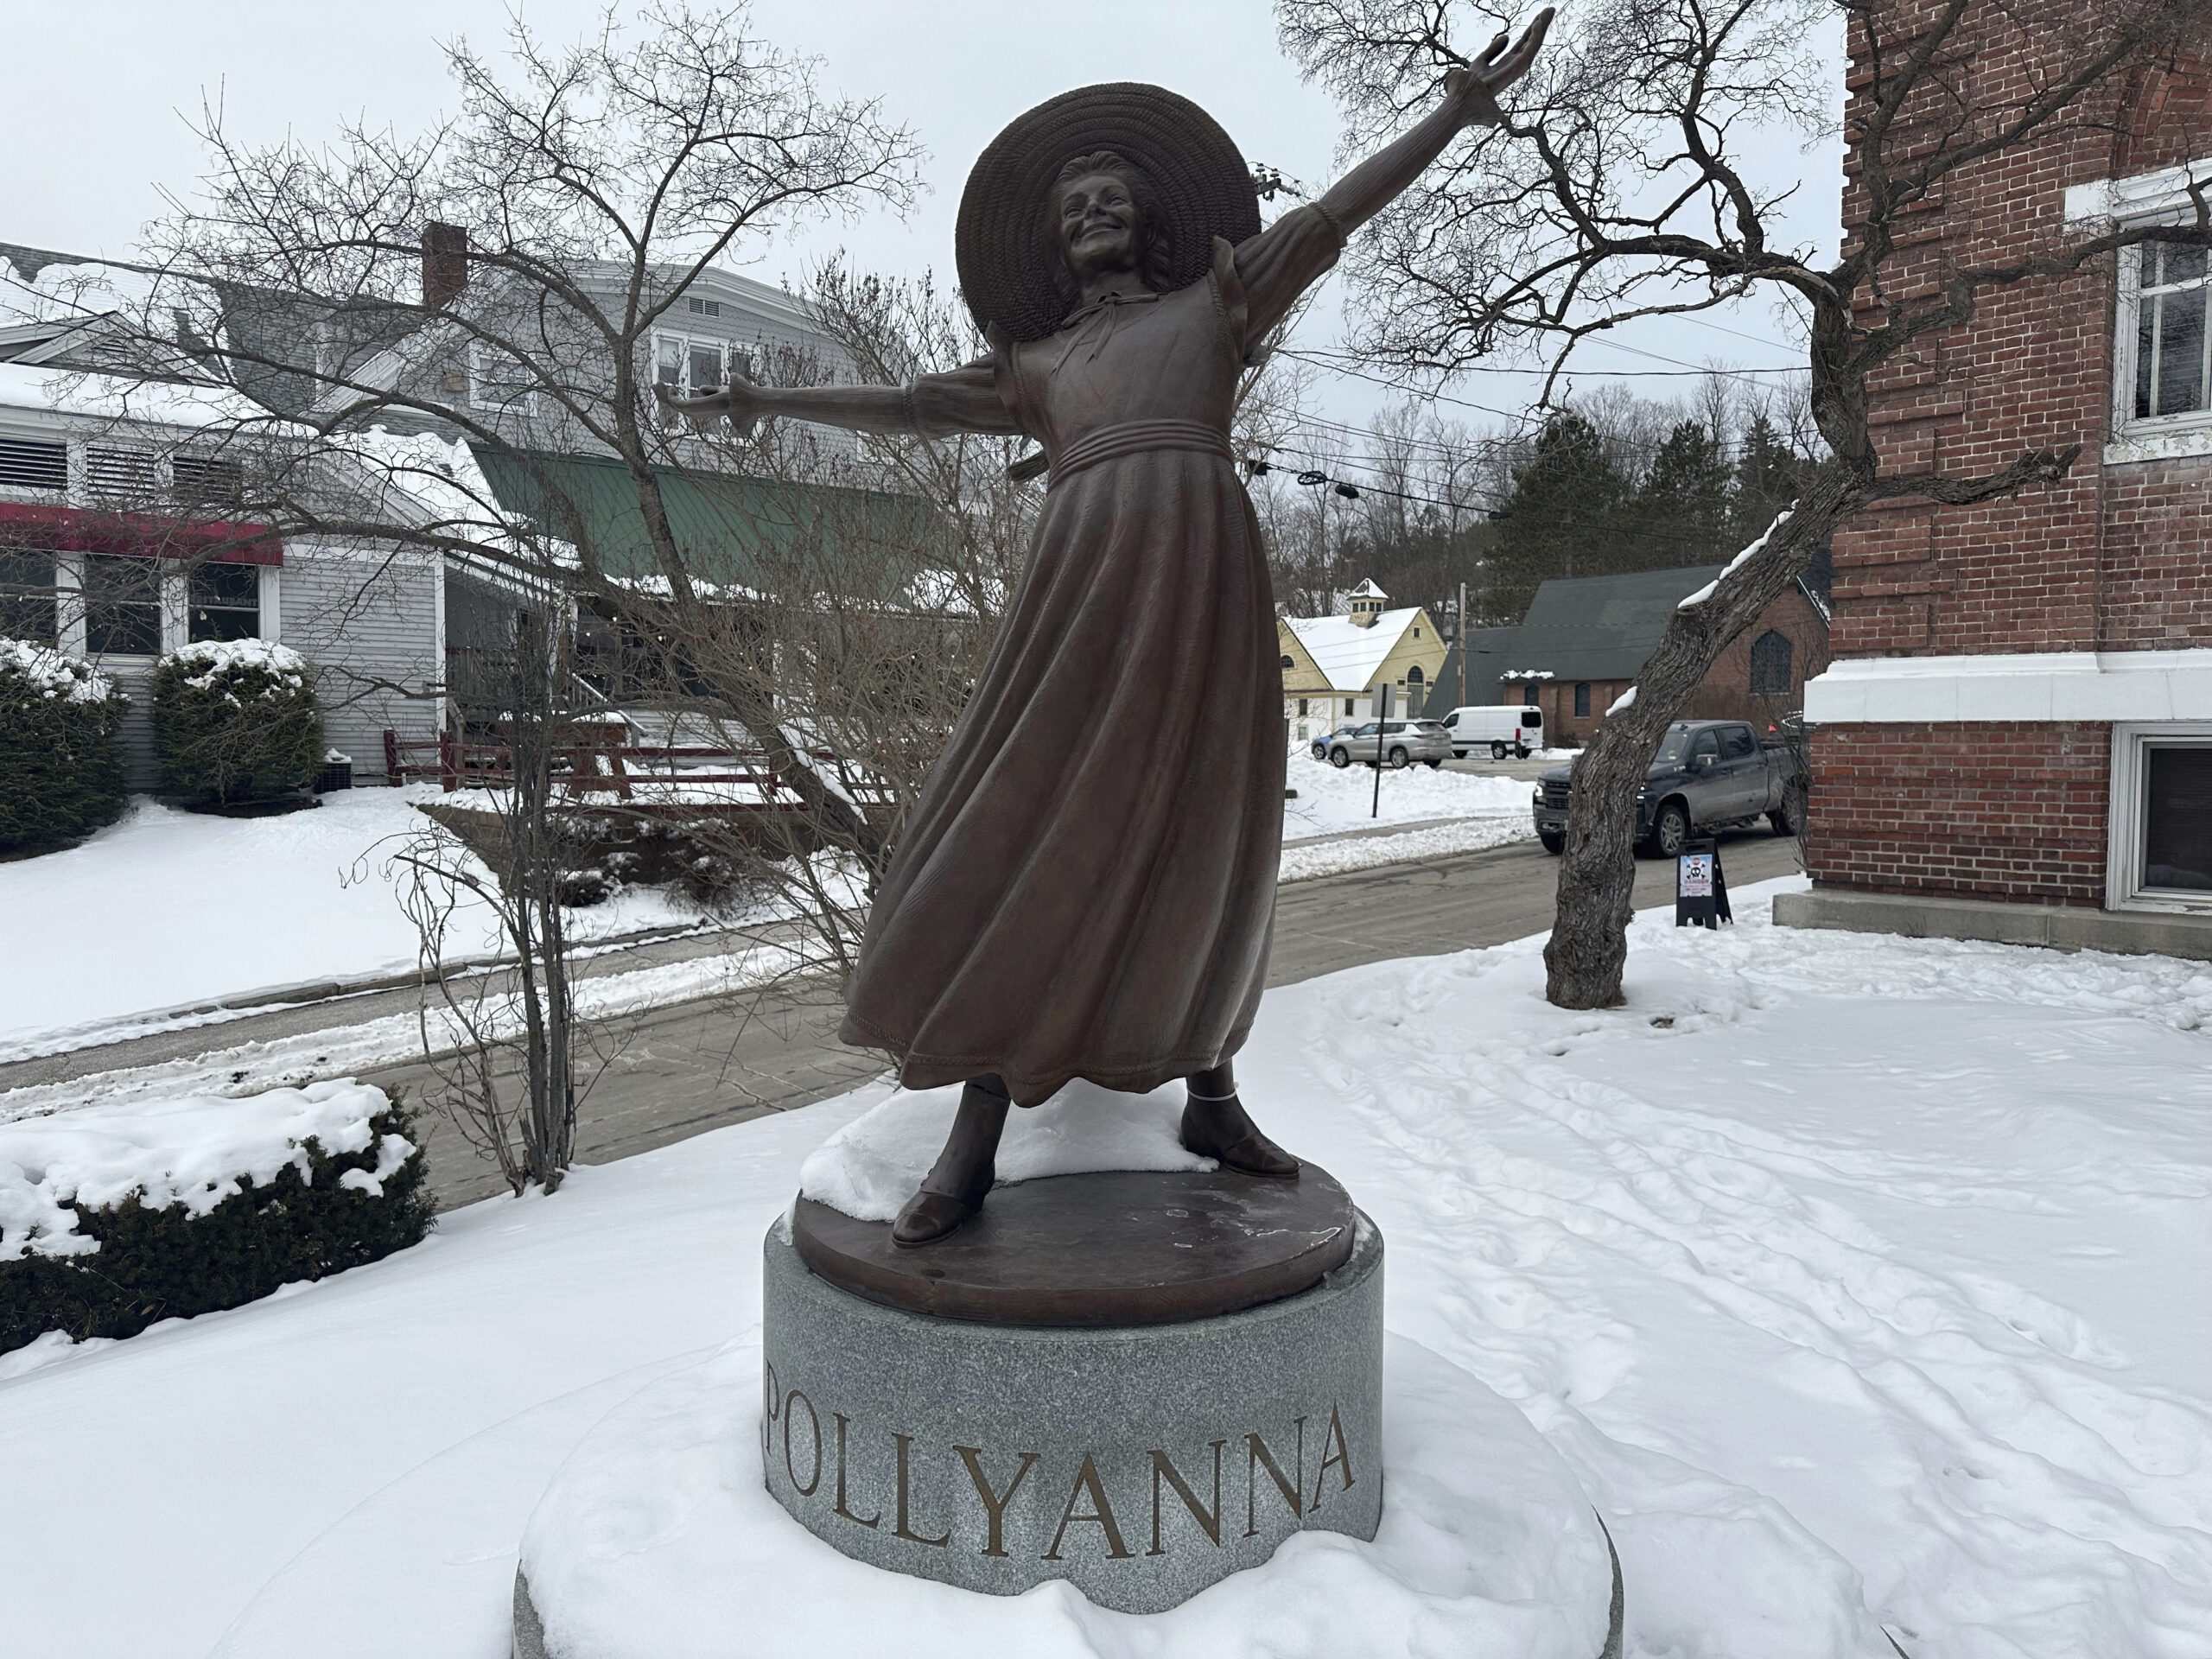 A bronze statue of Pollyanna sits outside the Littleton public library to honor the 1913 book by lo...